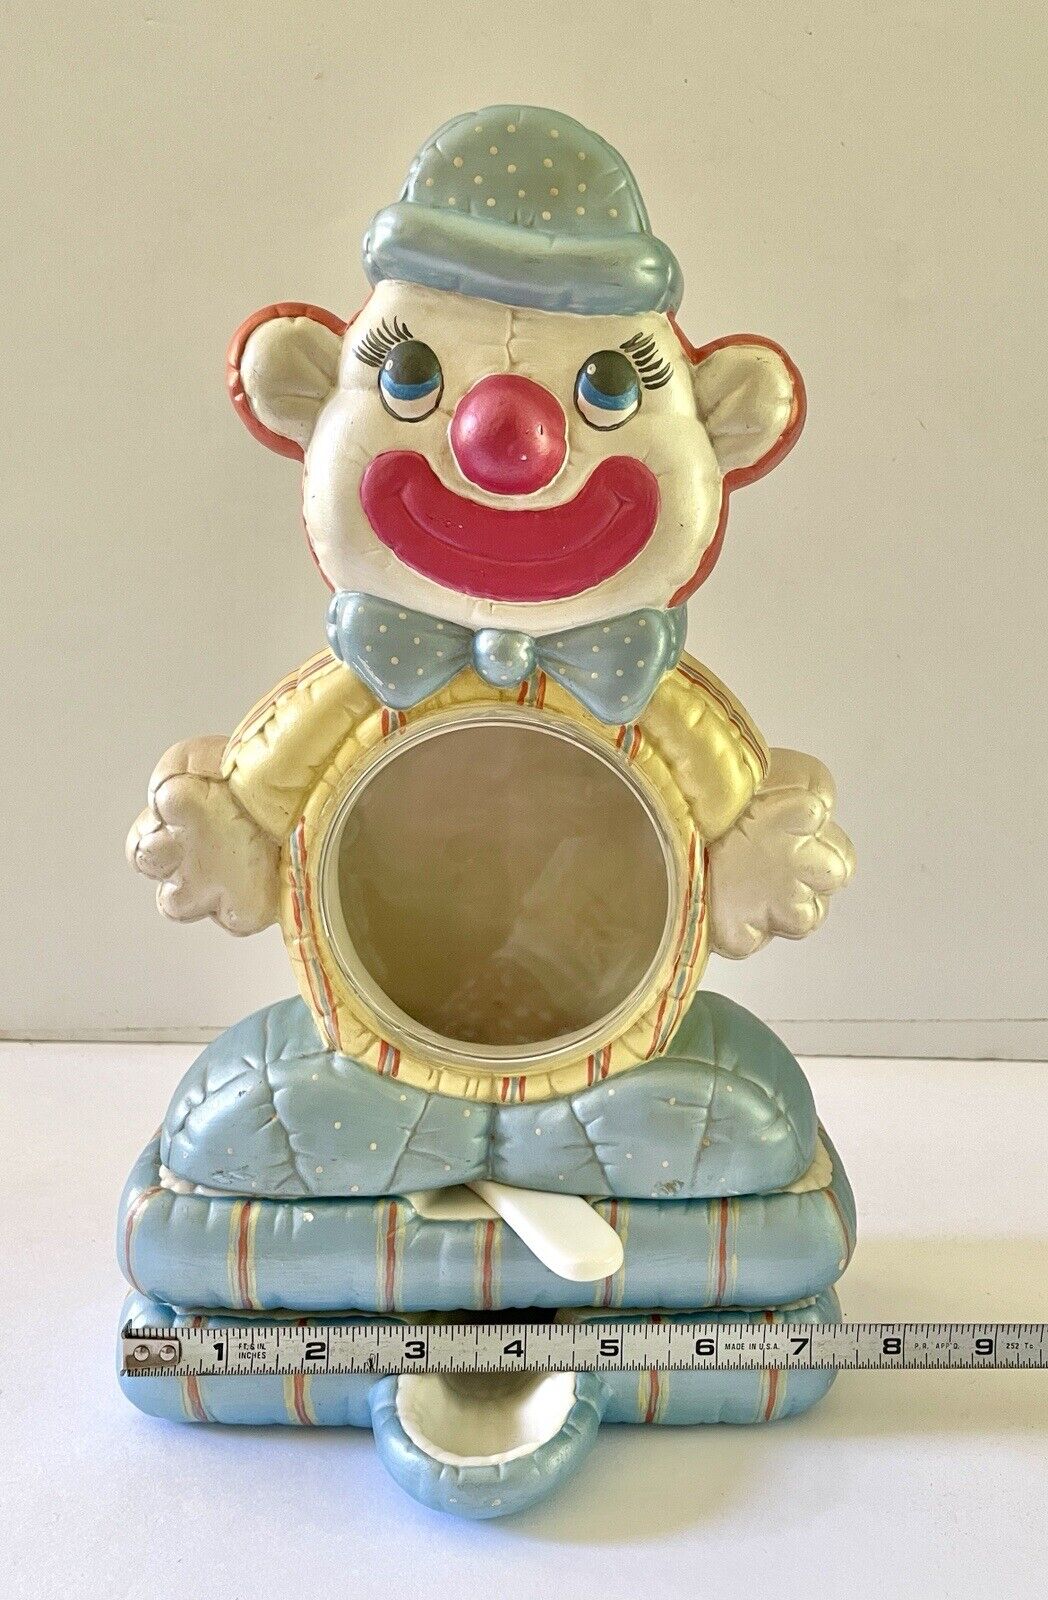 Vintage Ceramic Kimple Mold 4 Piece Clown Gumball Dispensers W/ Clear View Belly